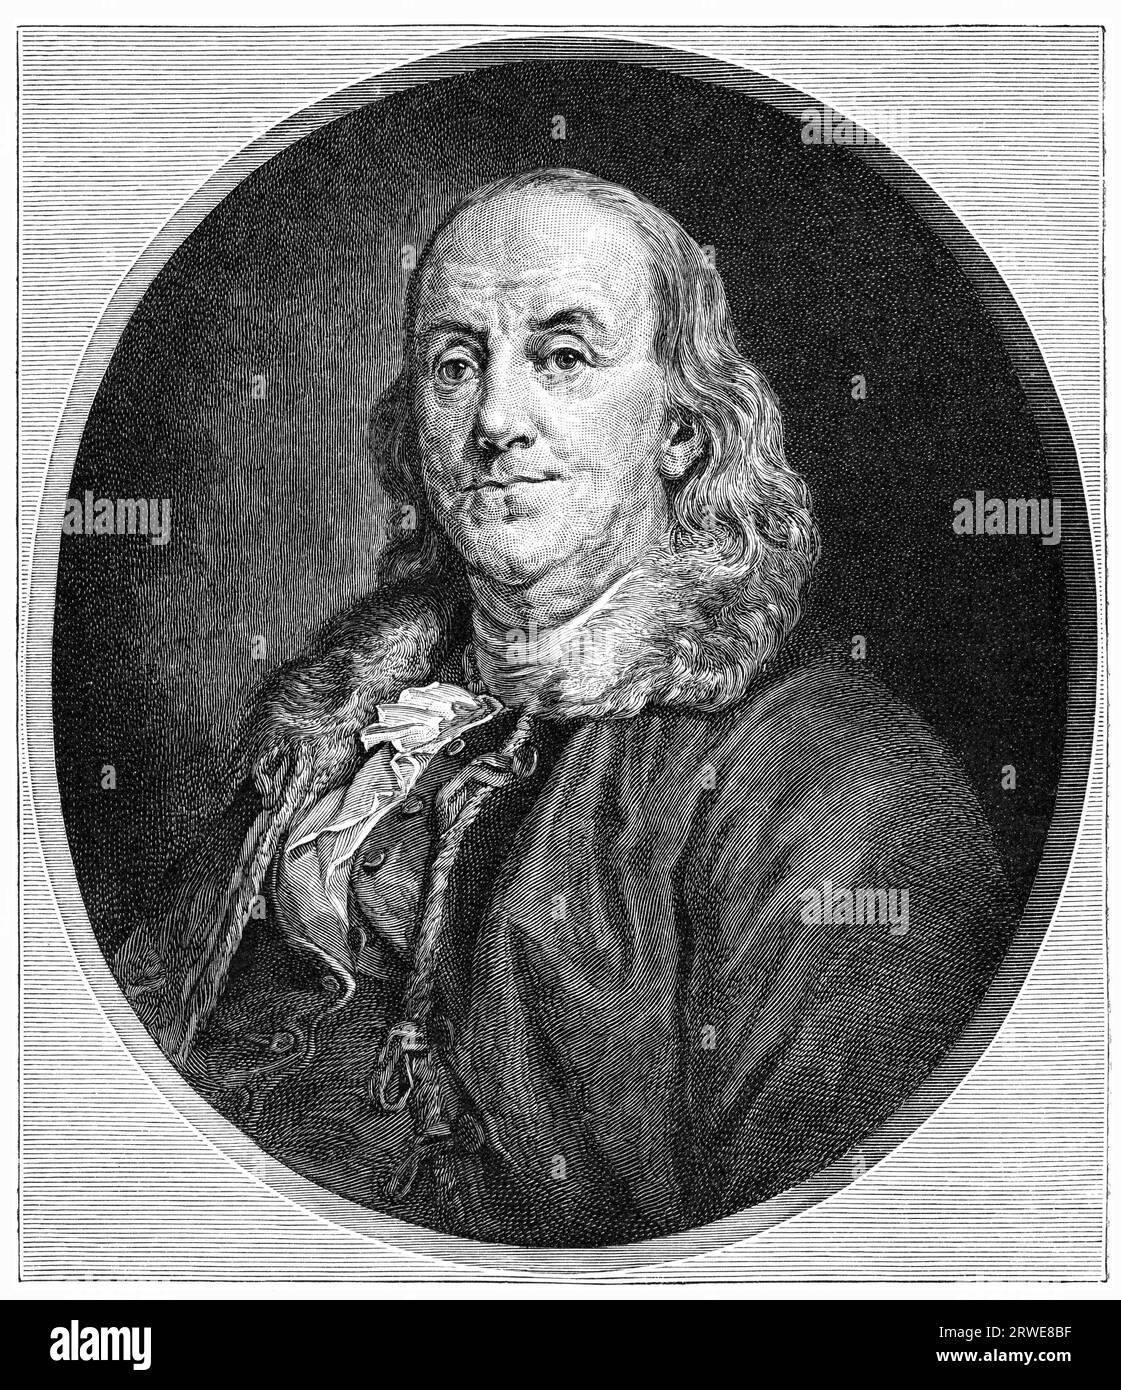 Benjamin Franklin (1706-1790) was one of the Founding Fathers of the United States. Illustration from Harpers Monthly magazine printed in 1883. by Stock Photo